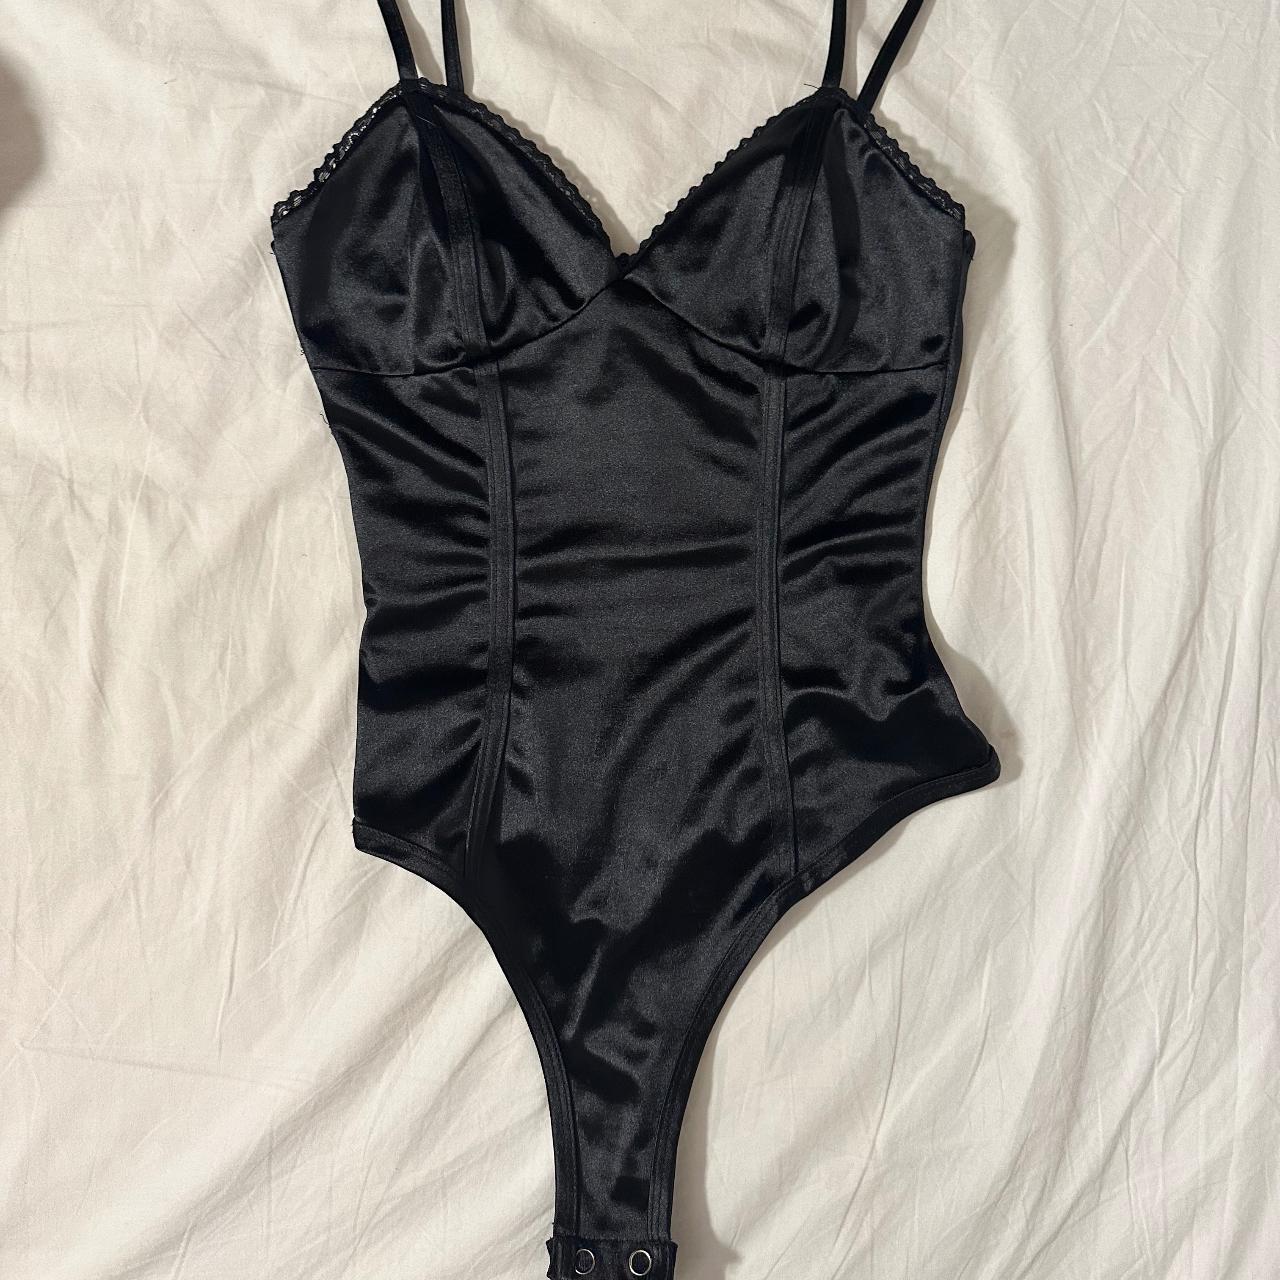 Black satin bodysuit perfect for going out only worn... - Depop